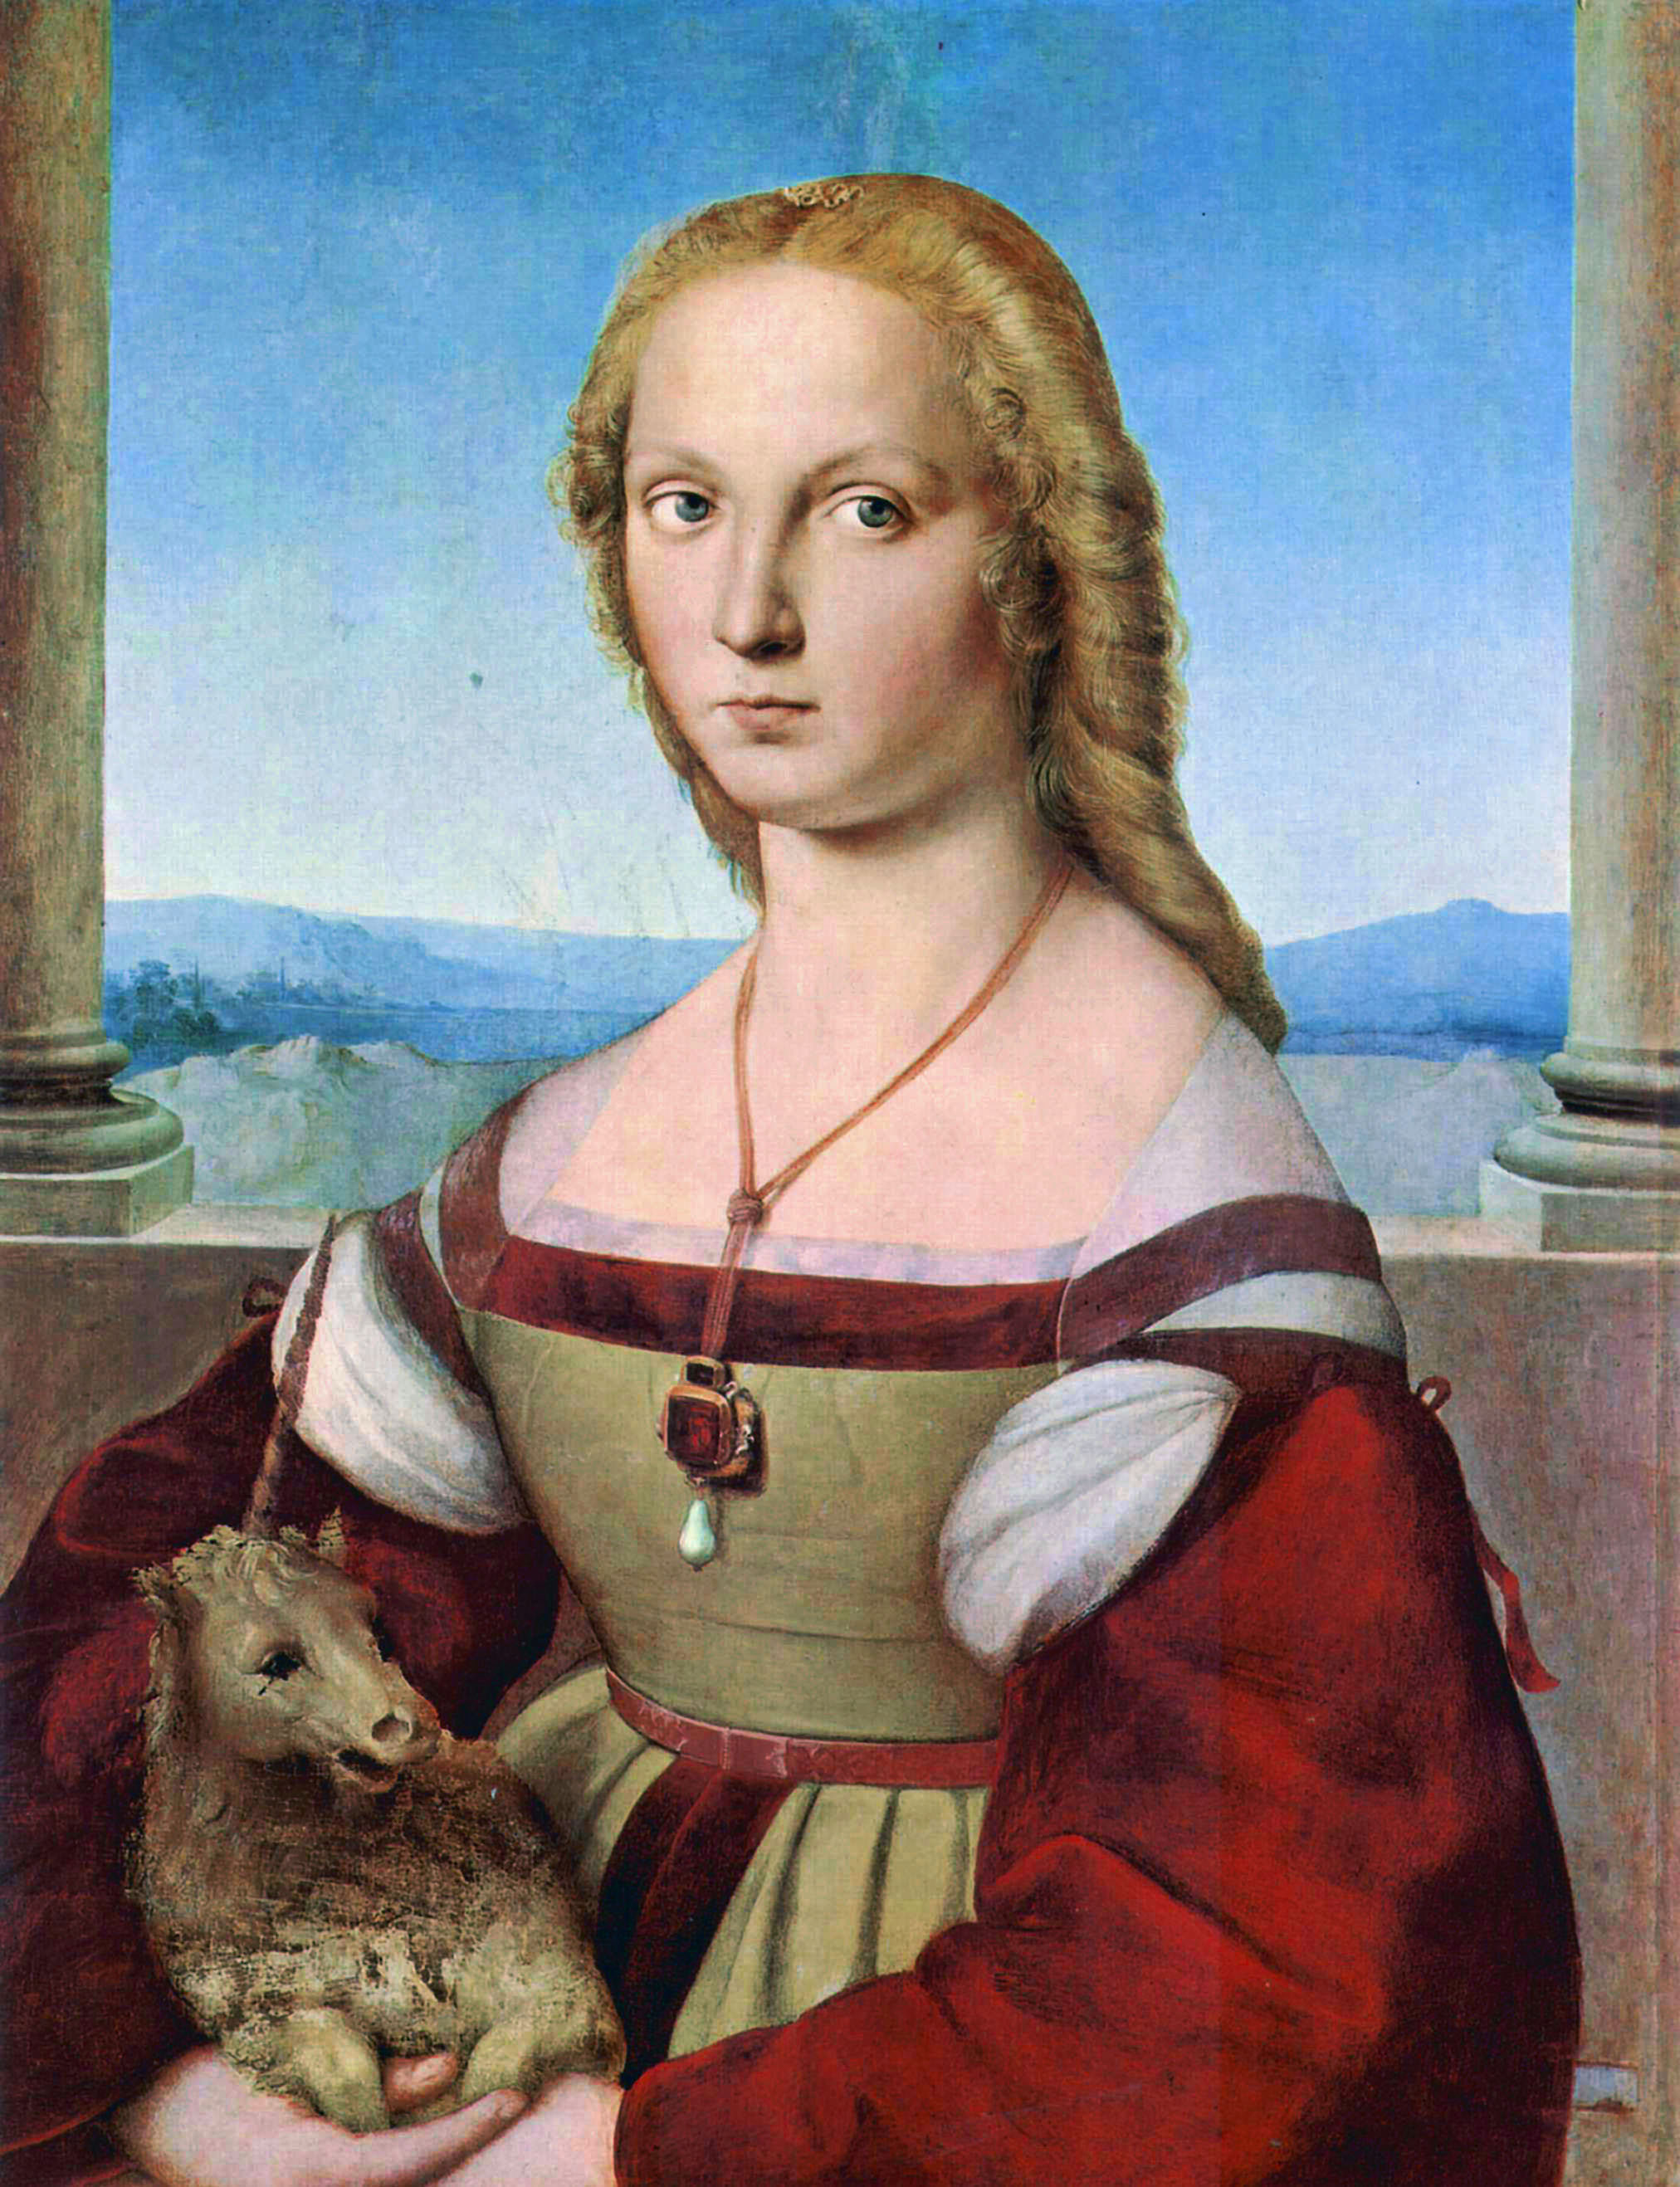 The original Young Woman With Unicorn by Raphael